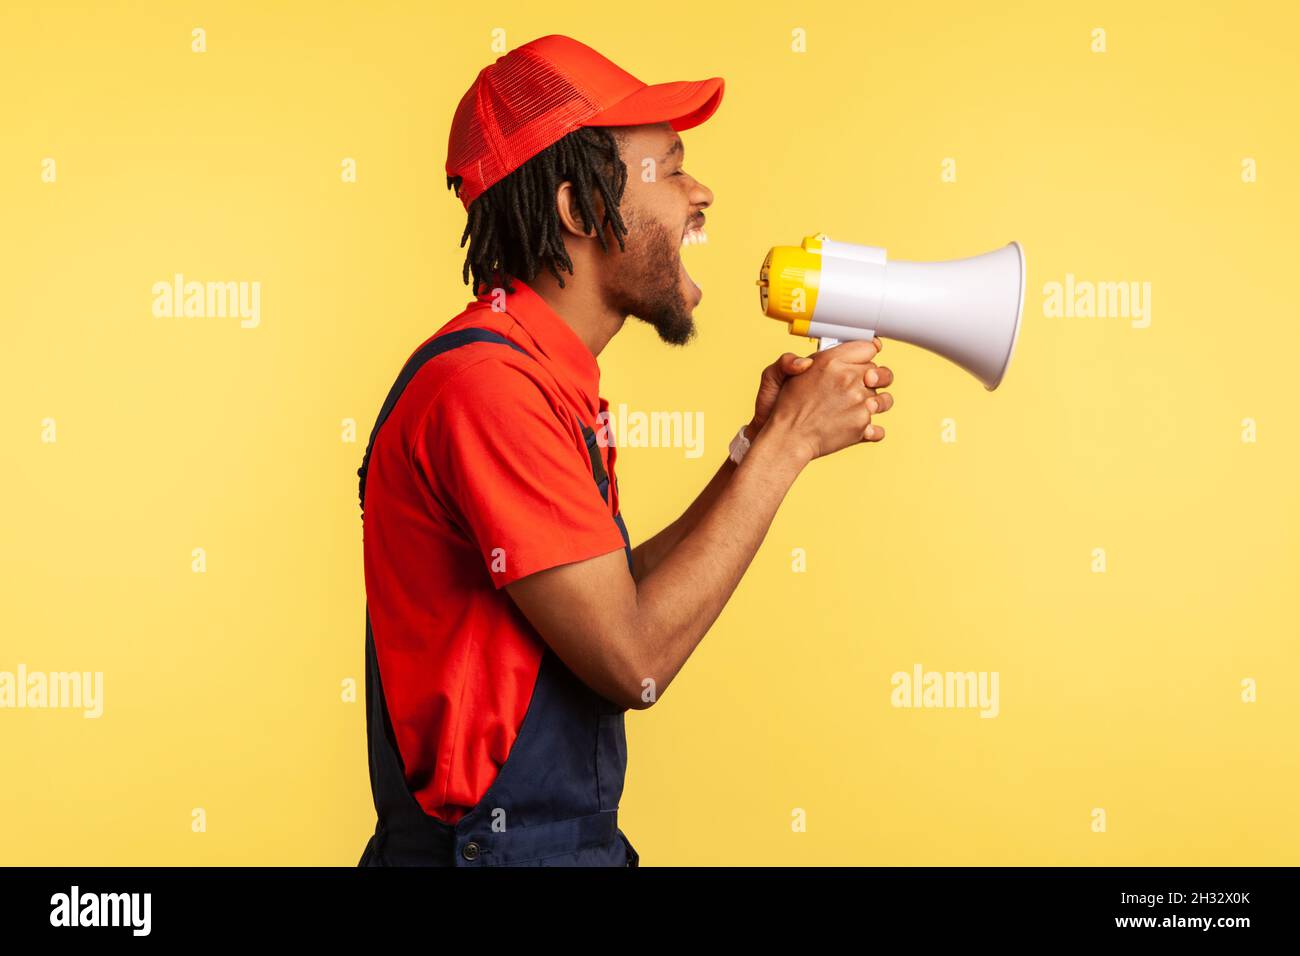 Side view portrait of aggressive worker wearing red T-shirt, cap and blue overalls holding megaphone and screaming loud, protesting. Indoor studio shot isolated on yellow background. Stock Photo